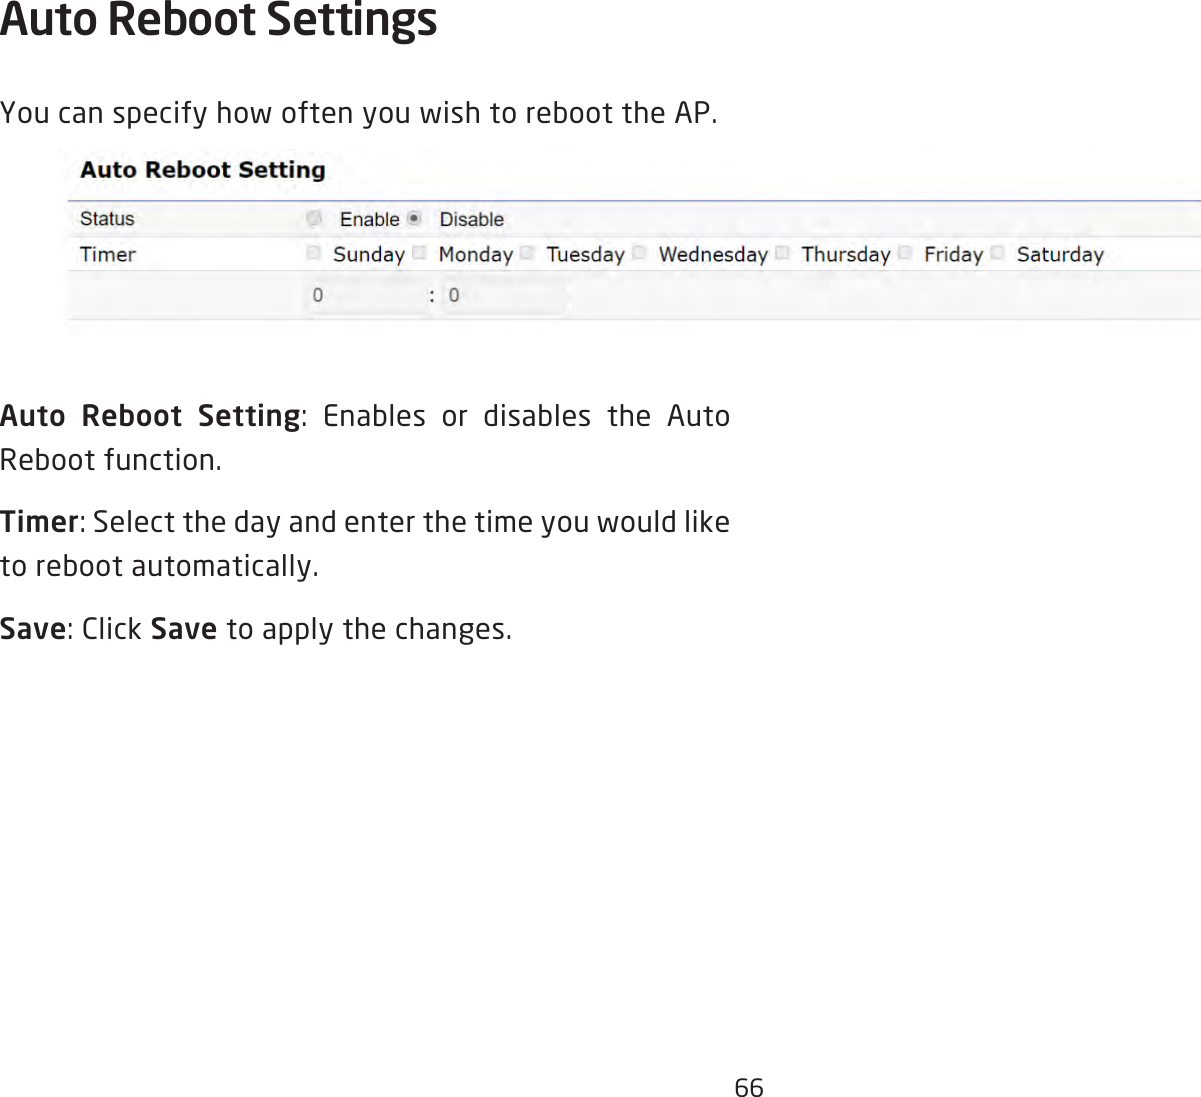 66Auto Reboot Settings You can specify how often you wish to reboot the AP.Auto Reboot Setting:  Enables  or  disables  the  Auto Reboot function.Timer: Select the day and enter the time you would like to reboot automatically.Save: Click Save to apply the changes.